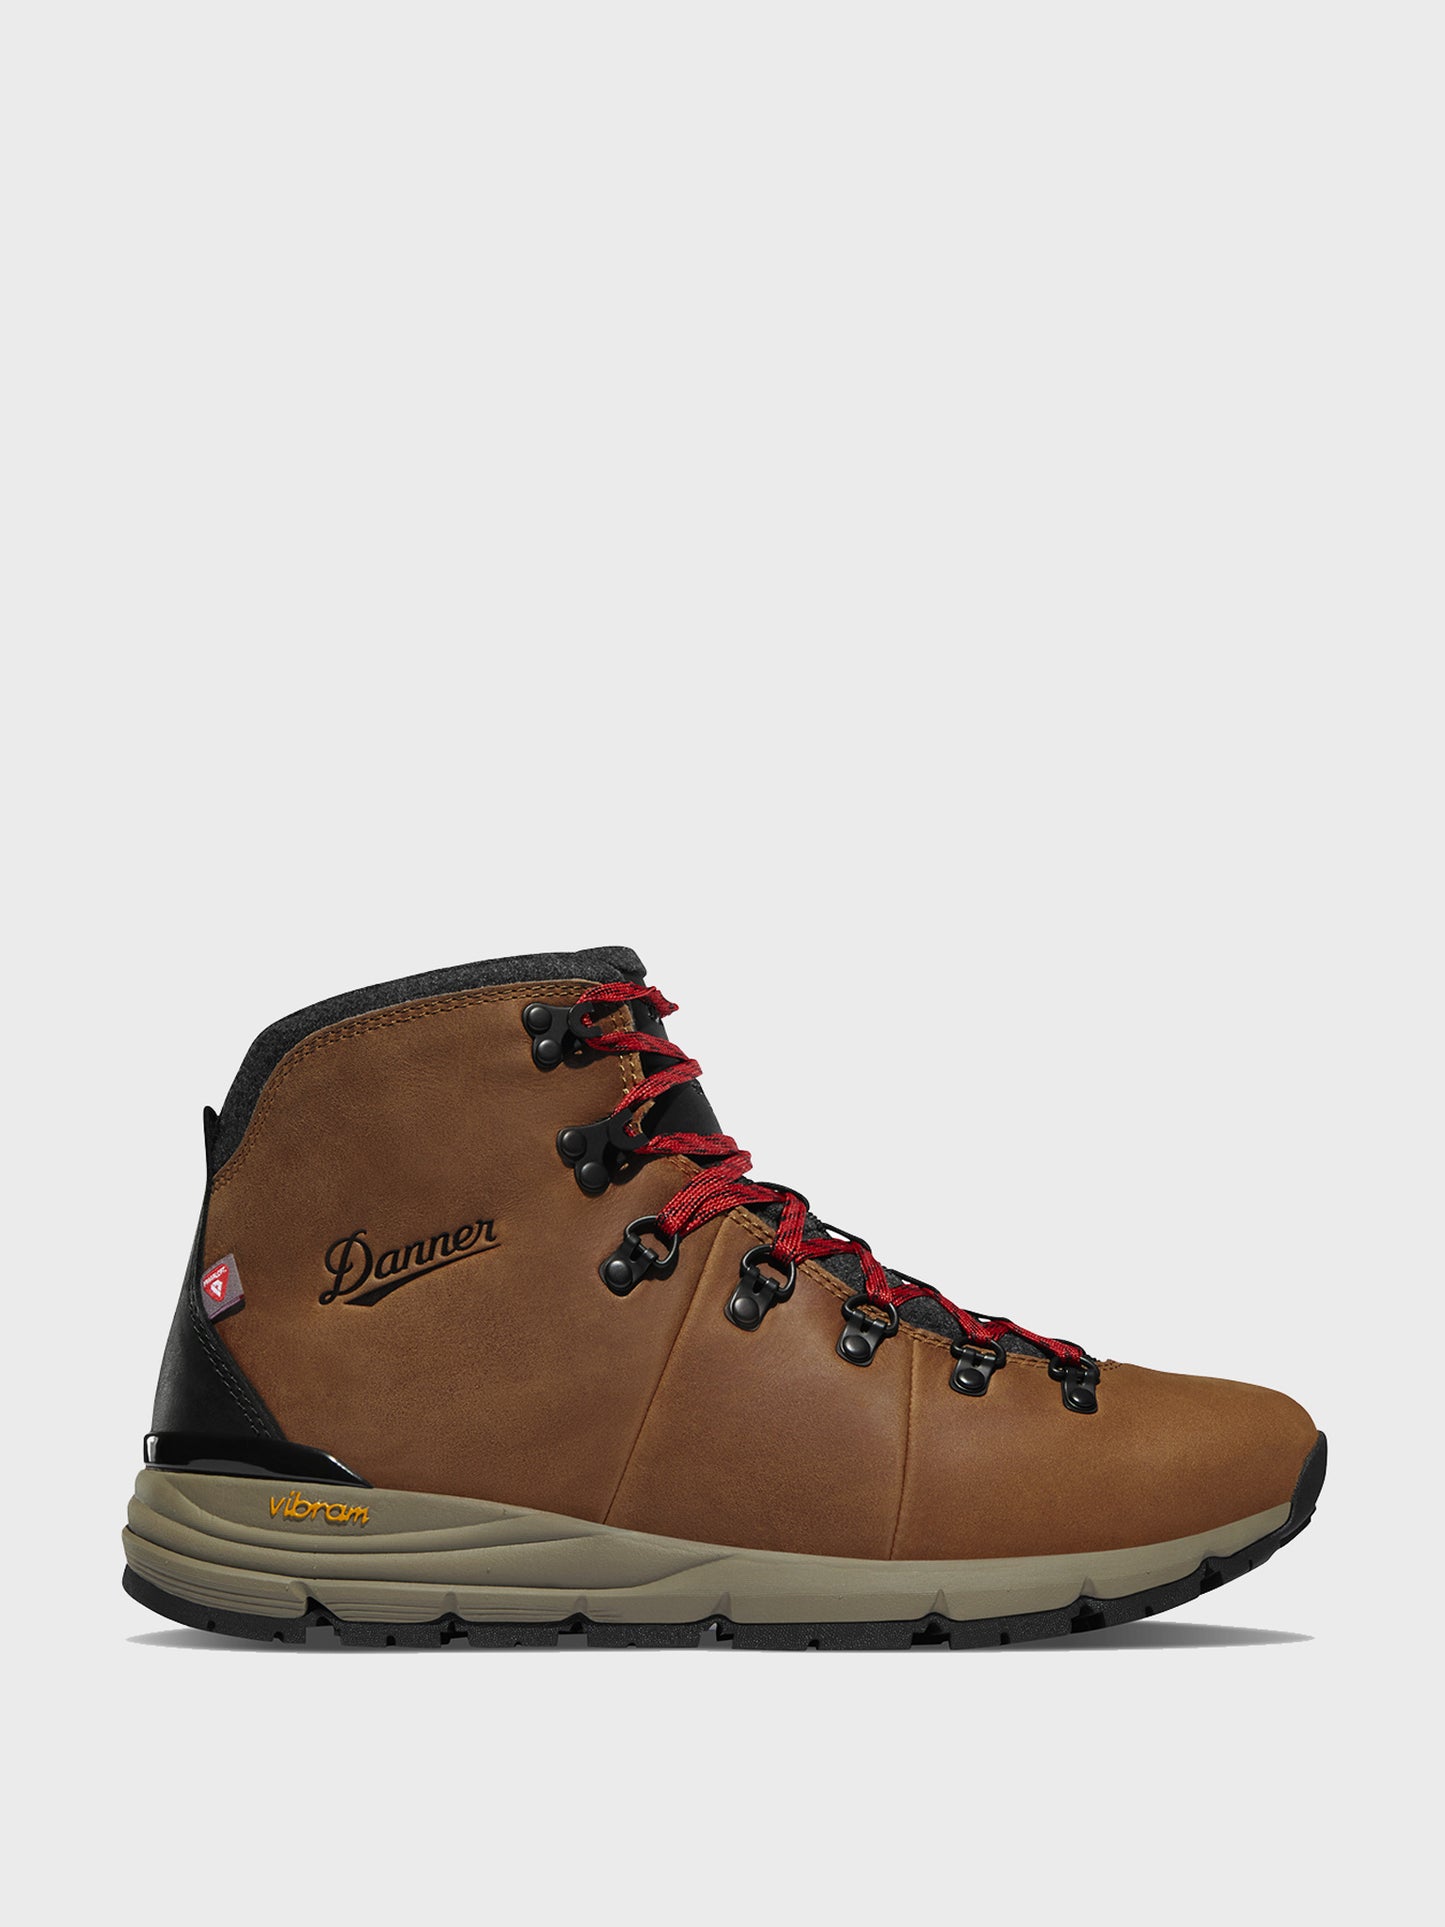 Danner Men's Weatherized Mountain 600 Insulated Boot